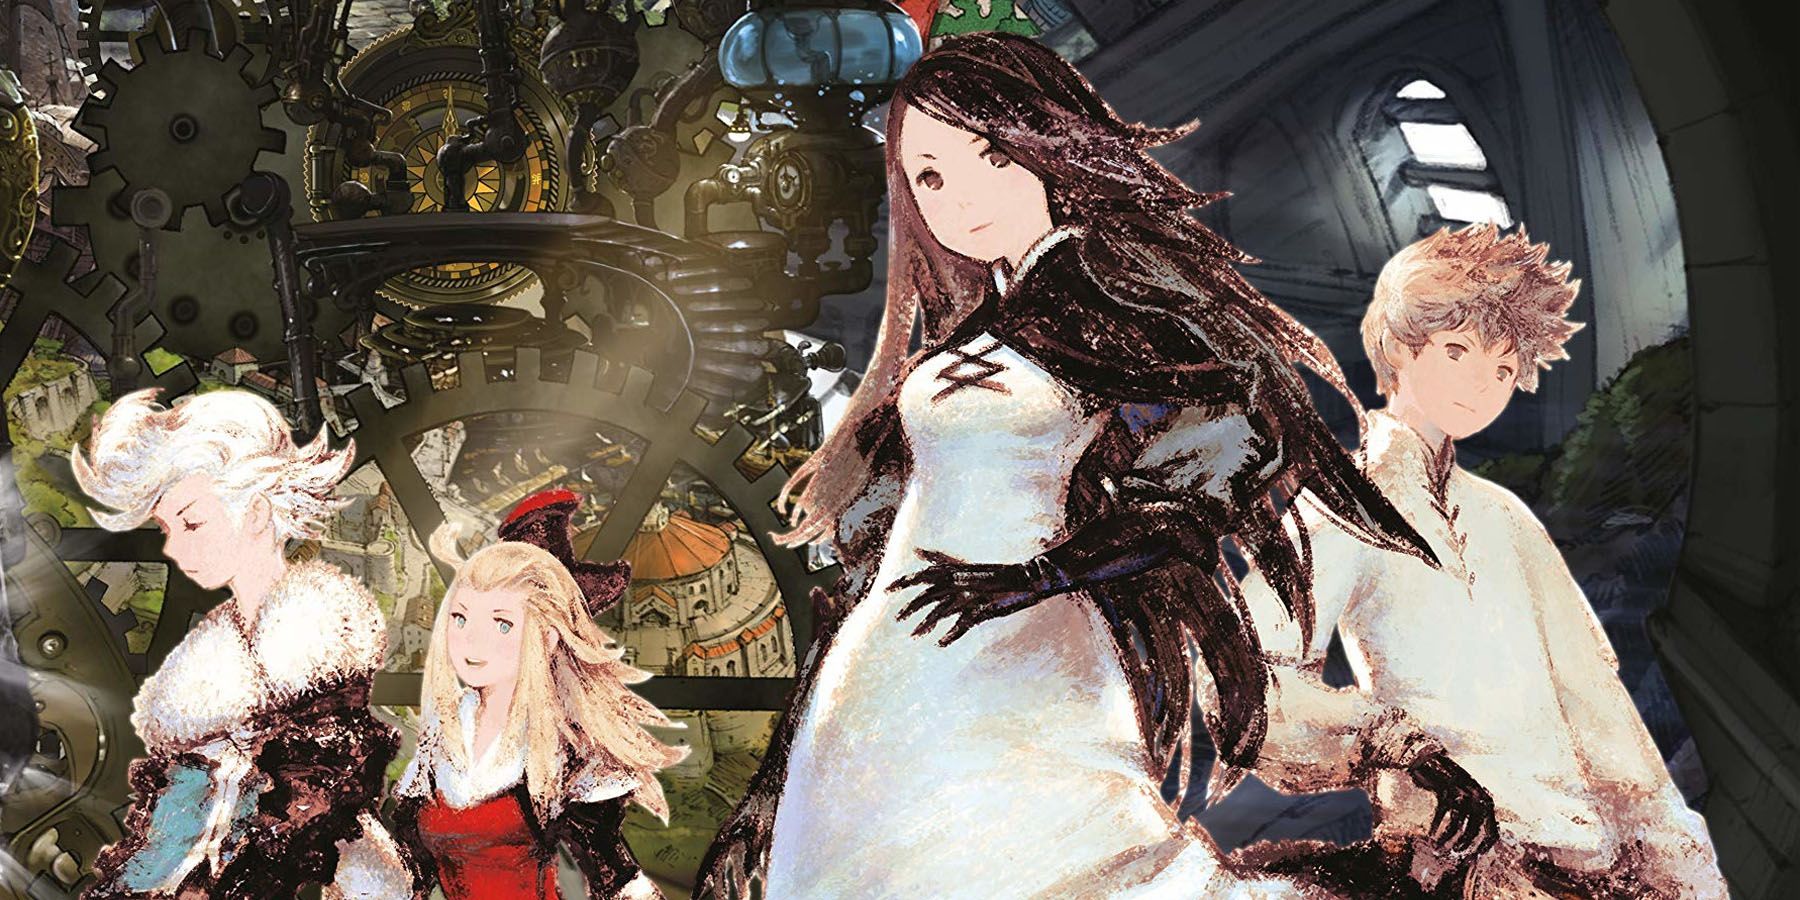 Bravely Default, Second creator teases upcoming series news